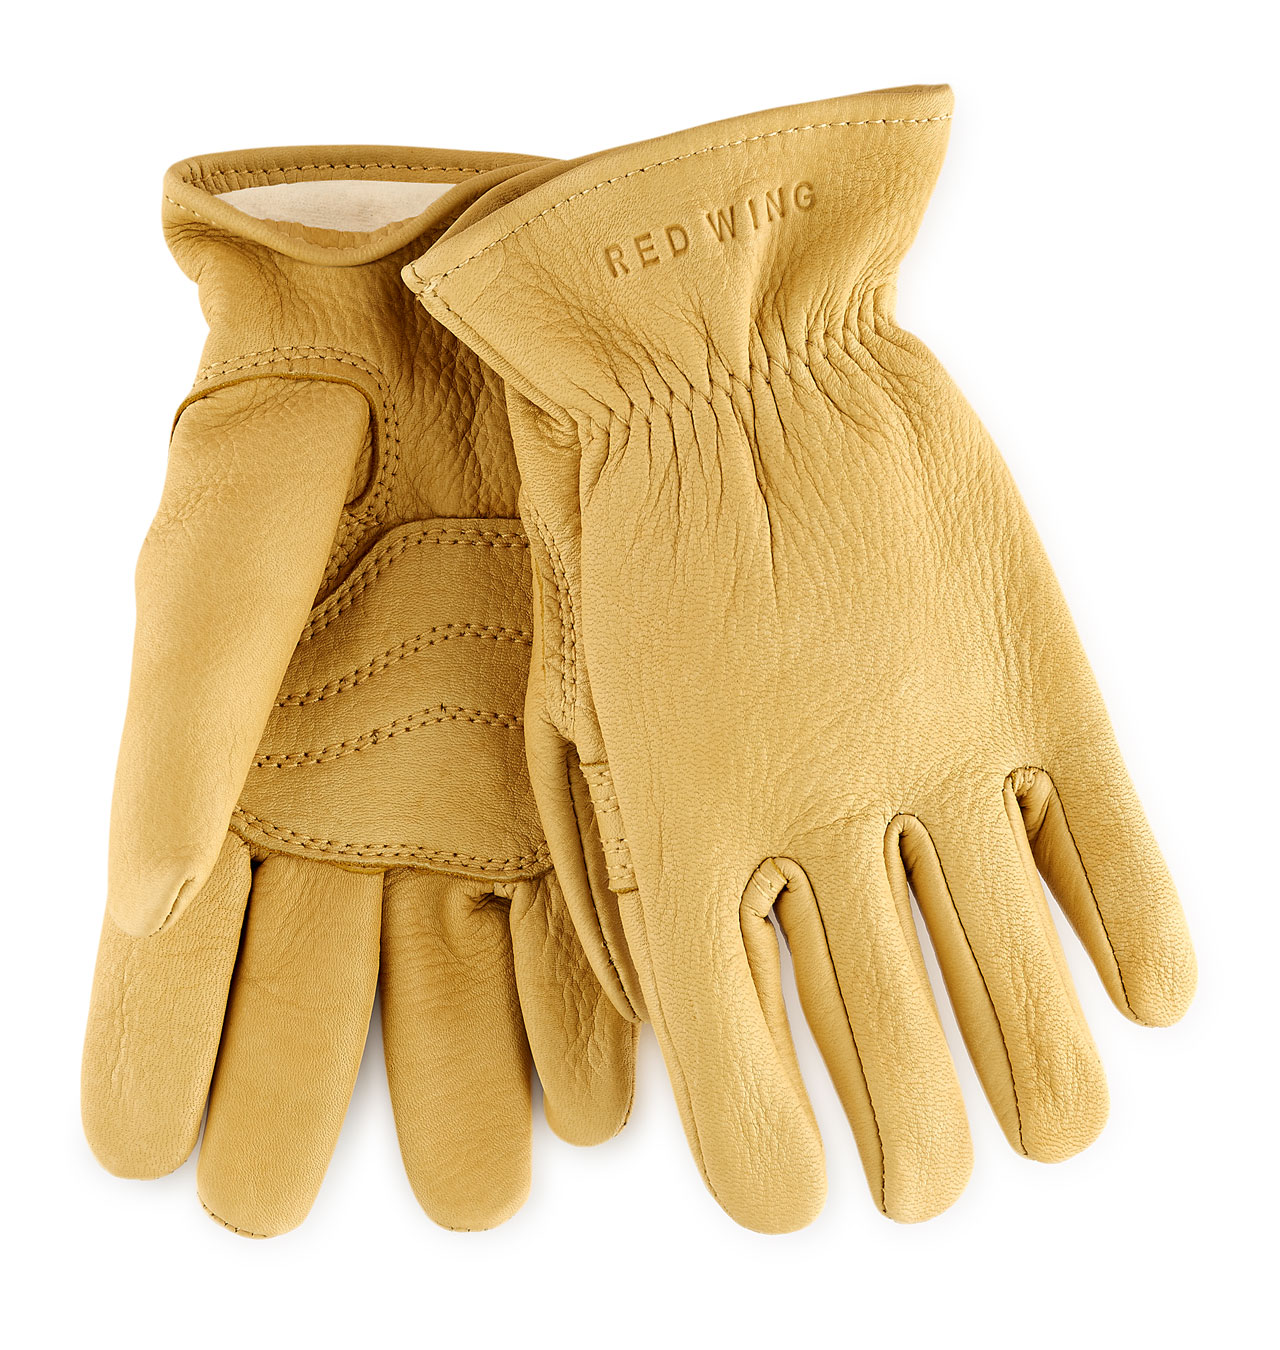 Red Wing - 95237 Buckskin Leather Lined Glove - Yellow